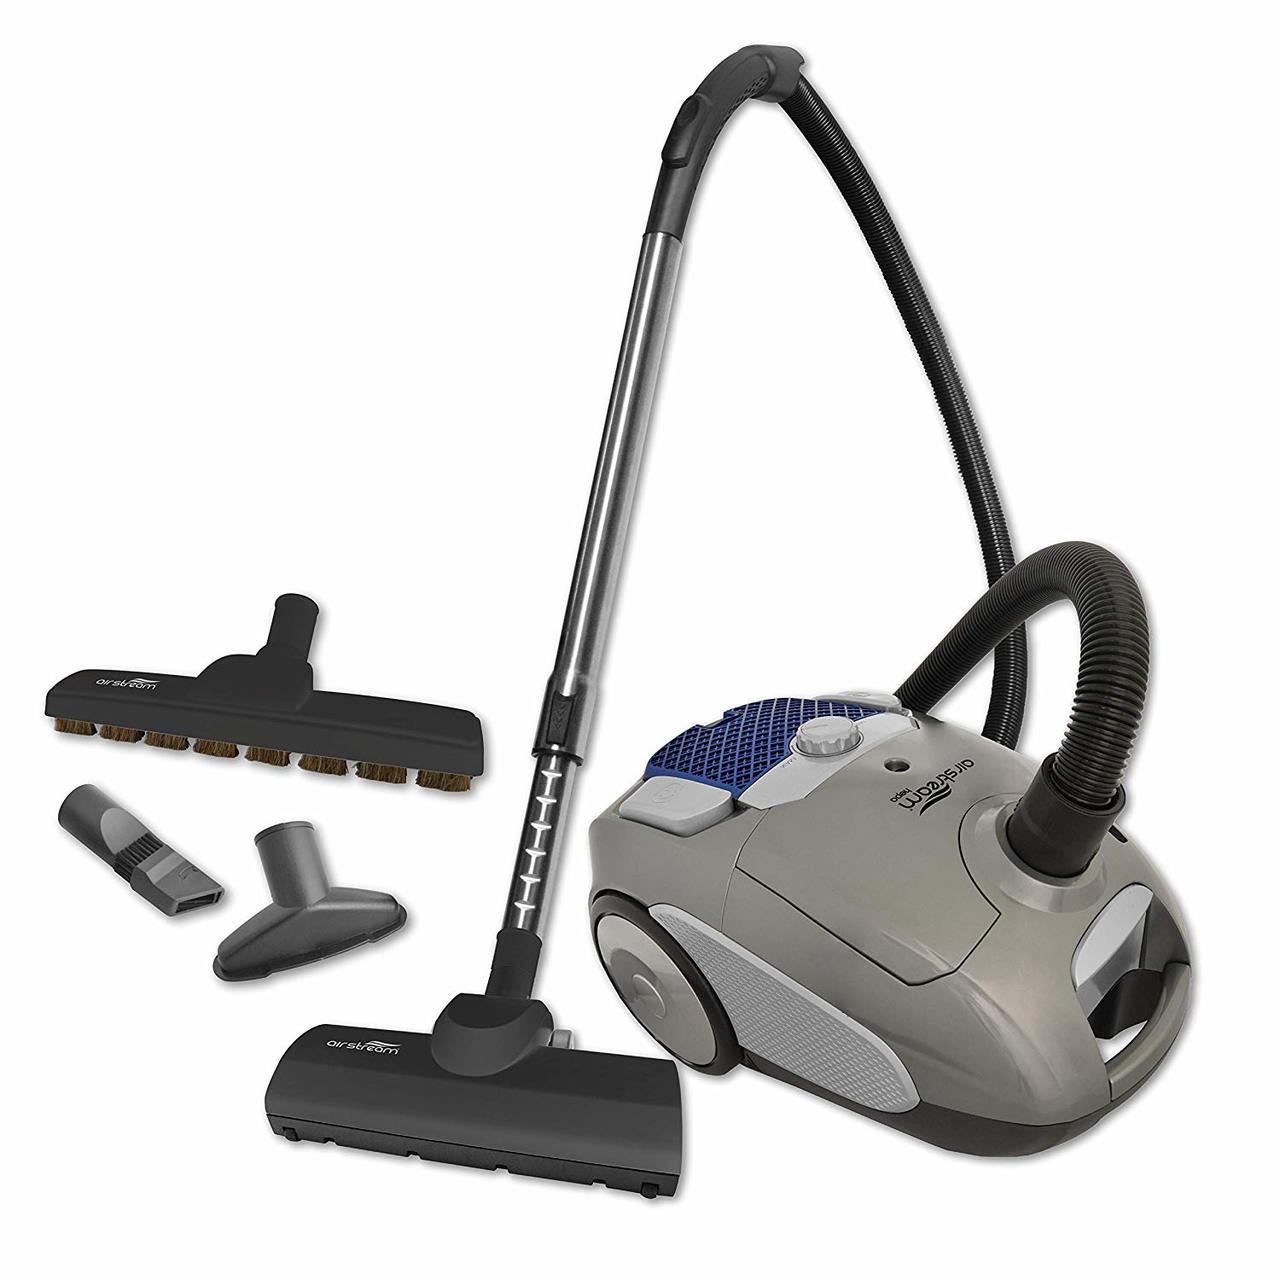 Airstream AS200 Corded Lightweight Canister Vacuum with Accessories - Super Vacs